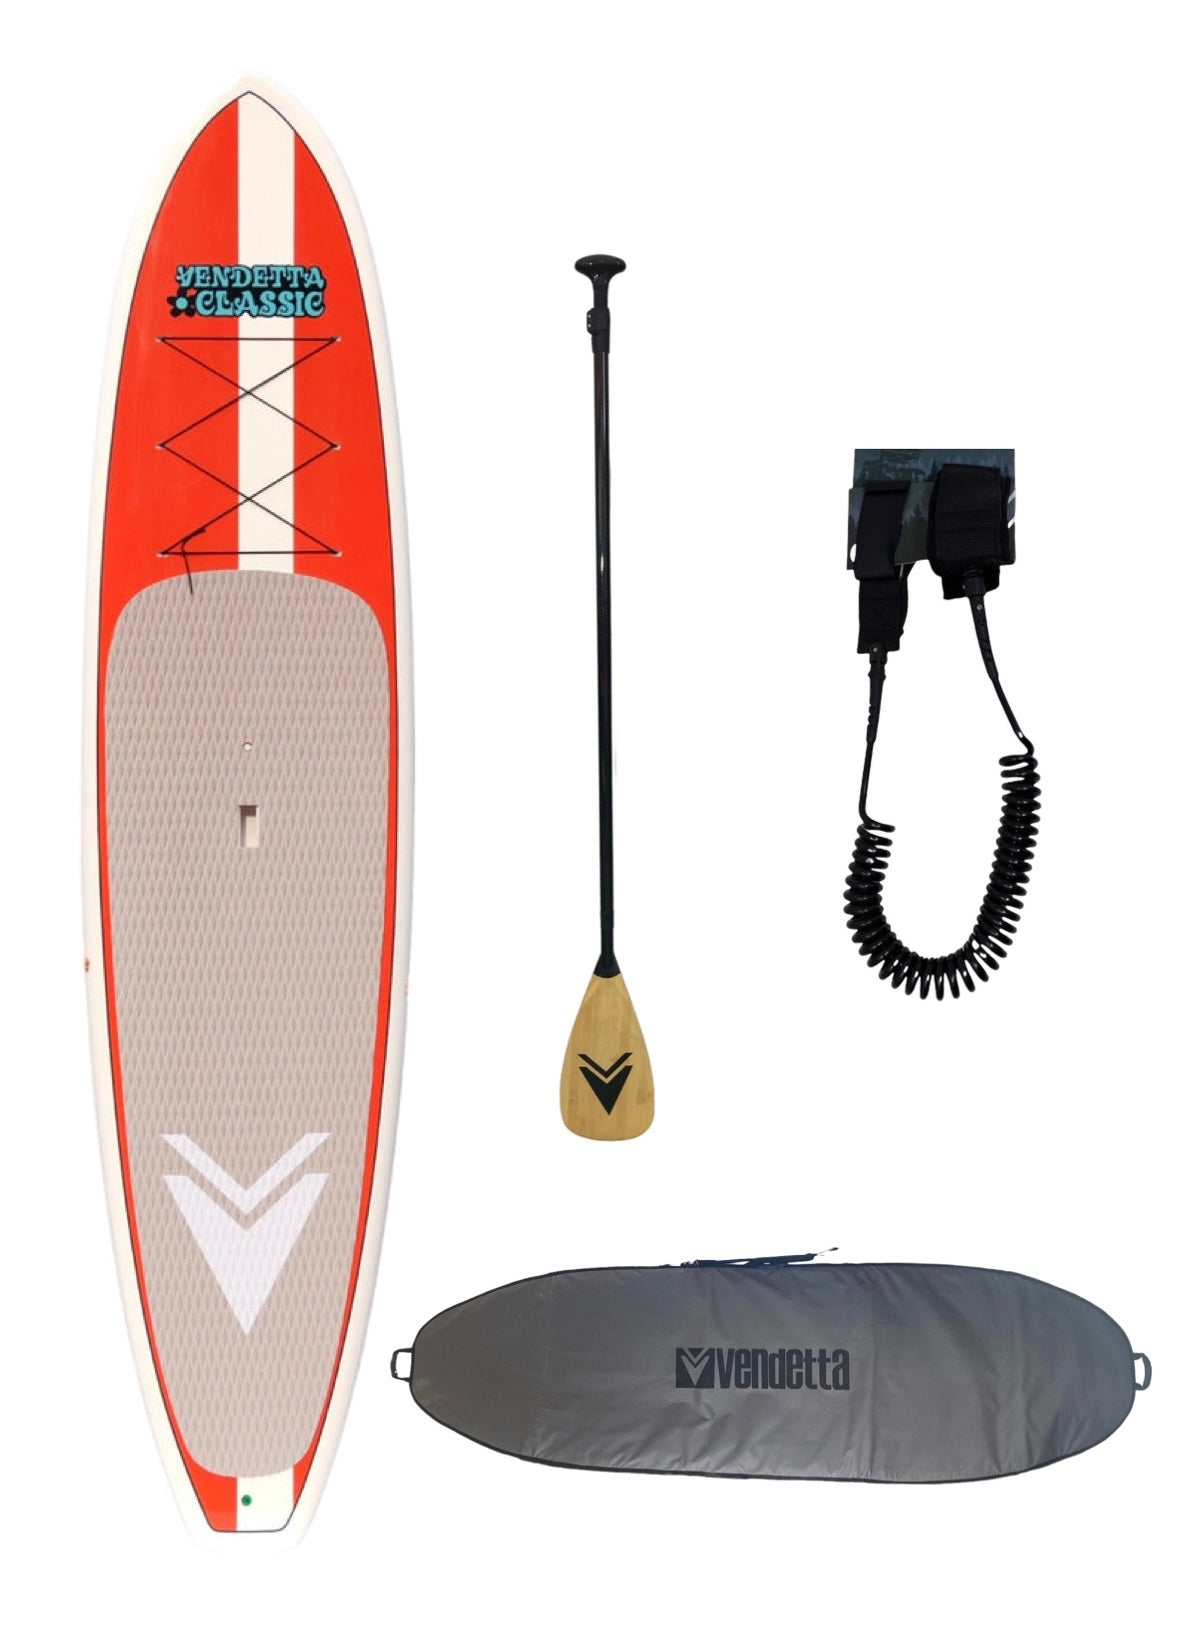 Itaostarstand up Paddle Board for All Skills with Premium Sup